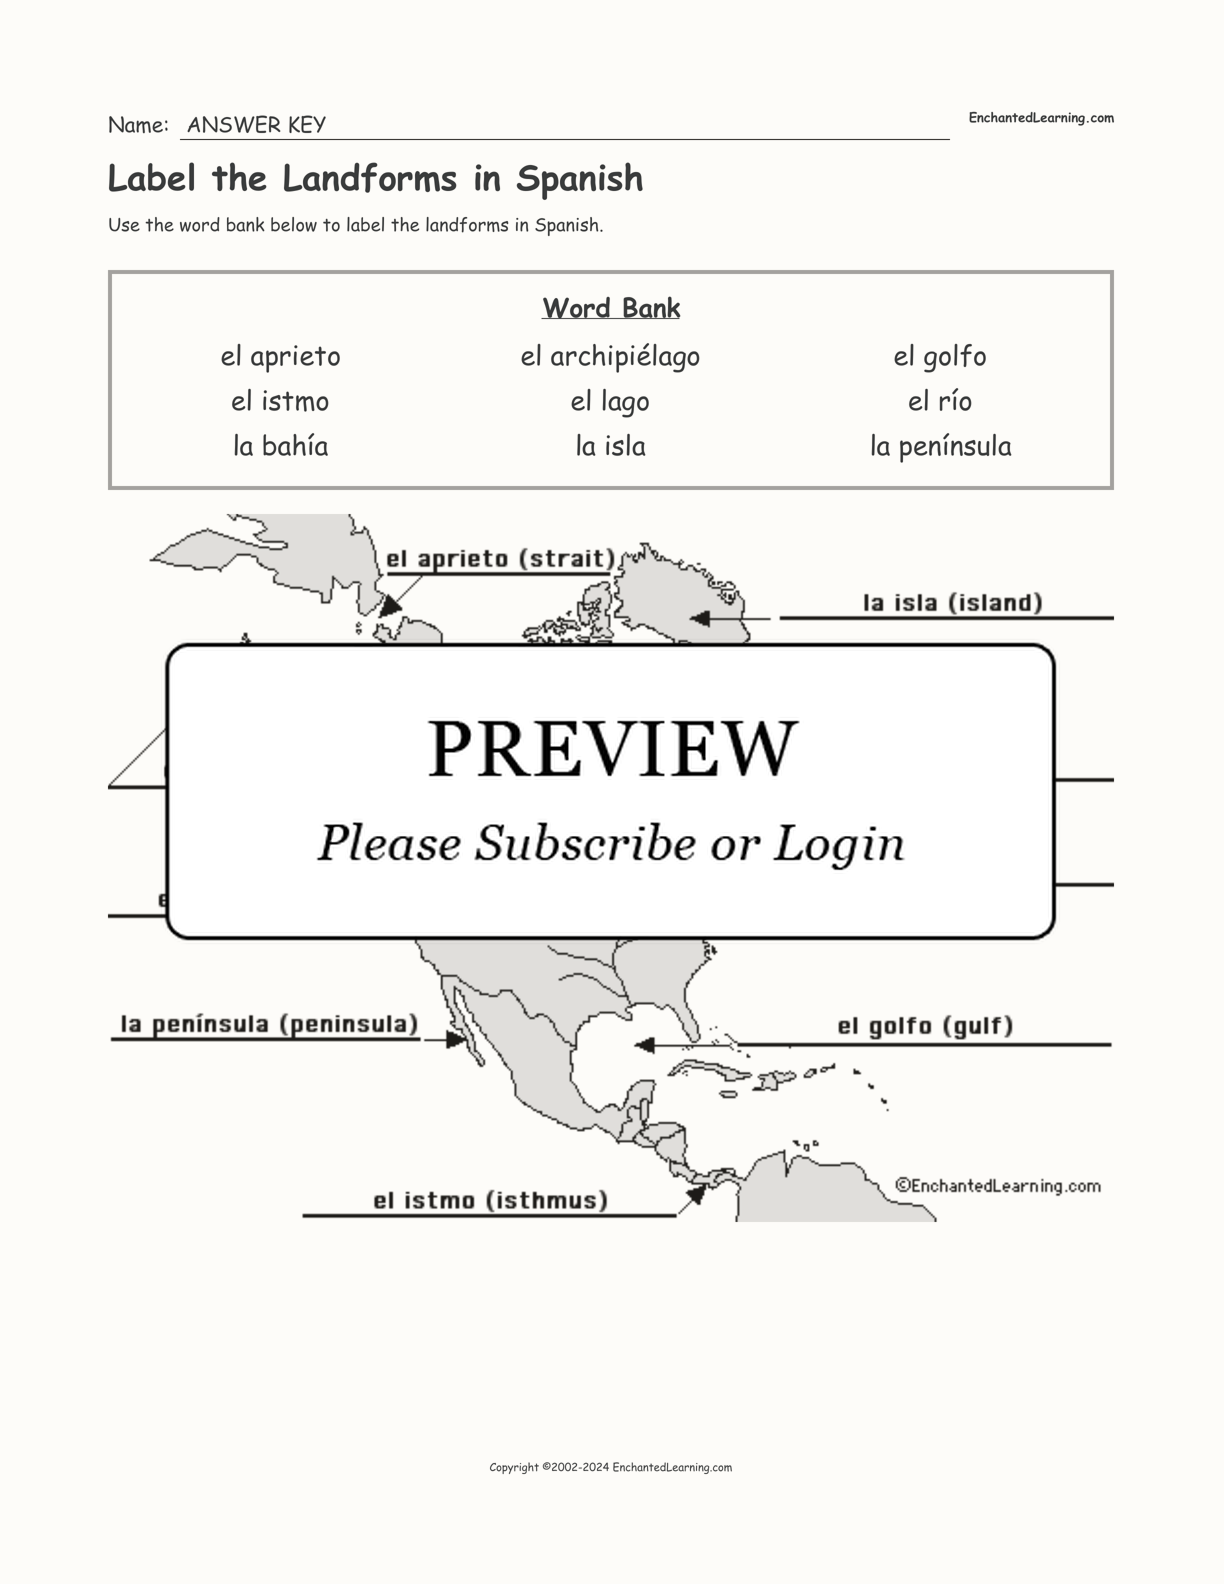 Label the Landforms in Spanish interactive worksheet page 2